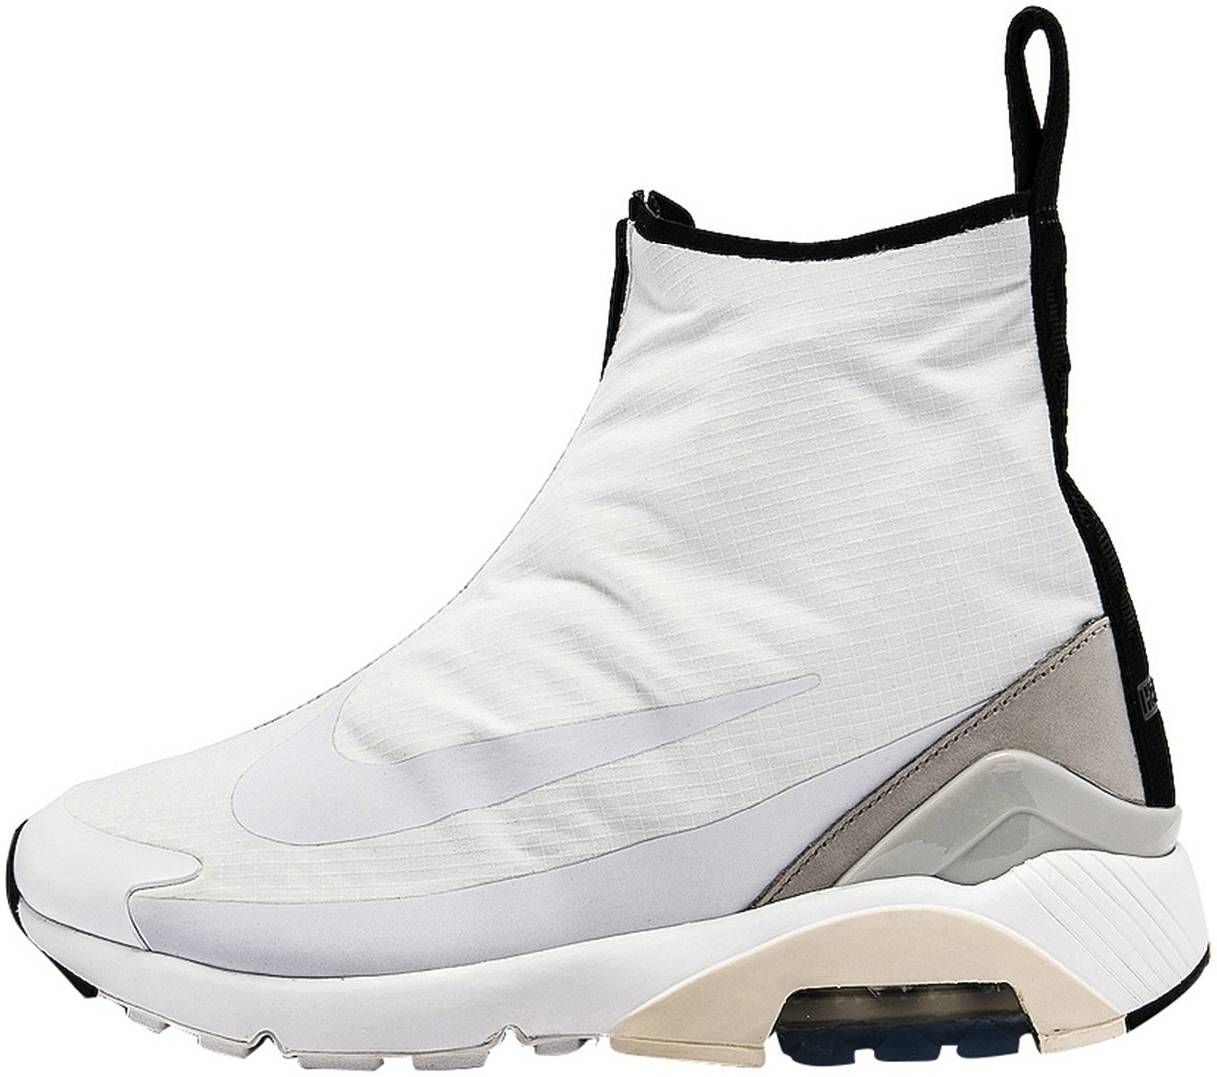 Nike Air Max 180 High sneakers in white 